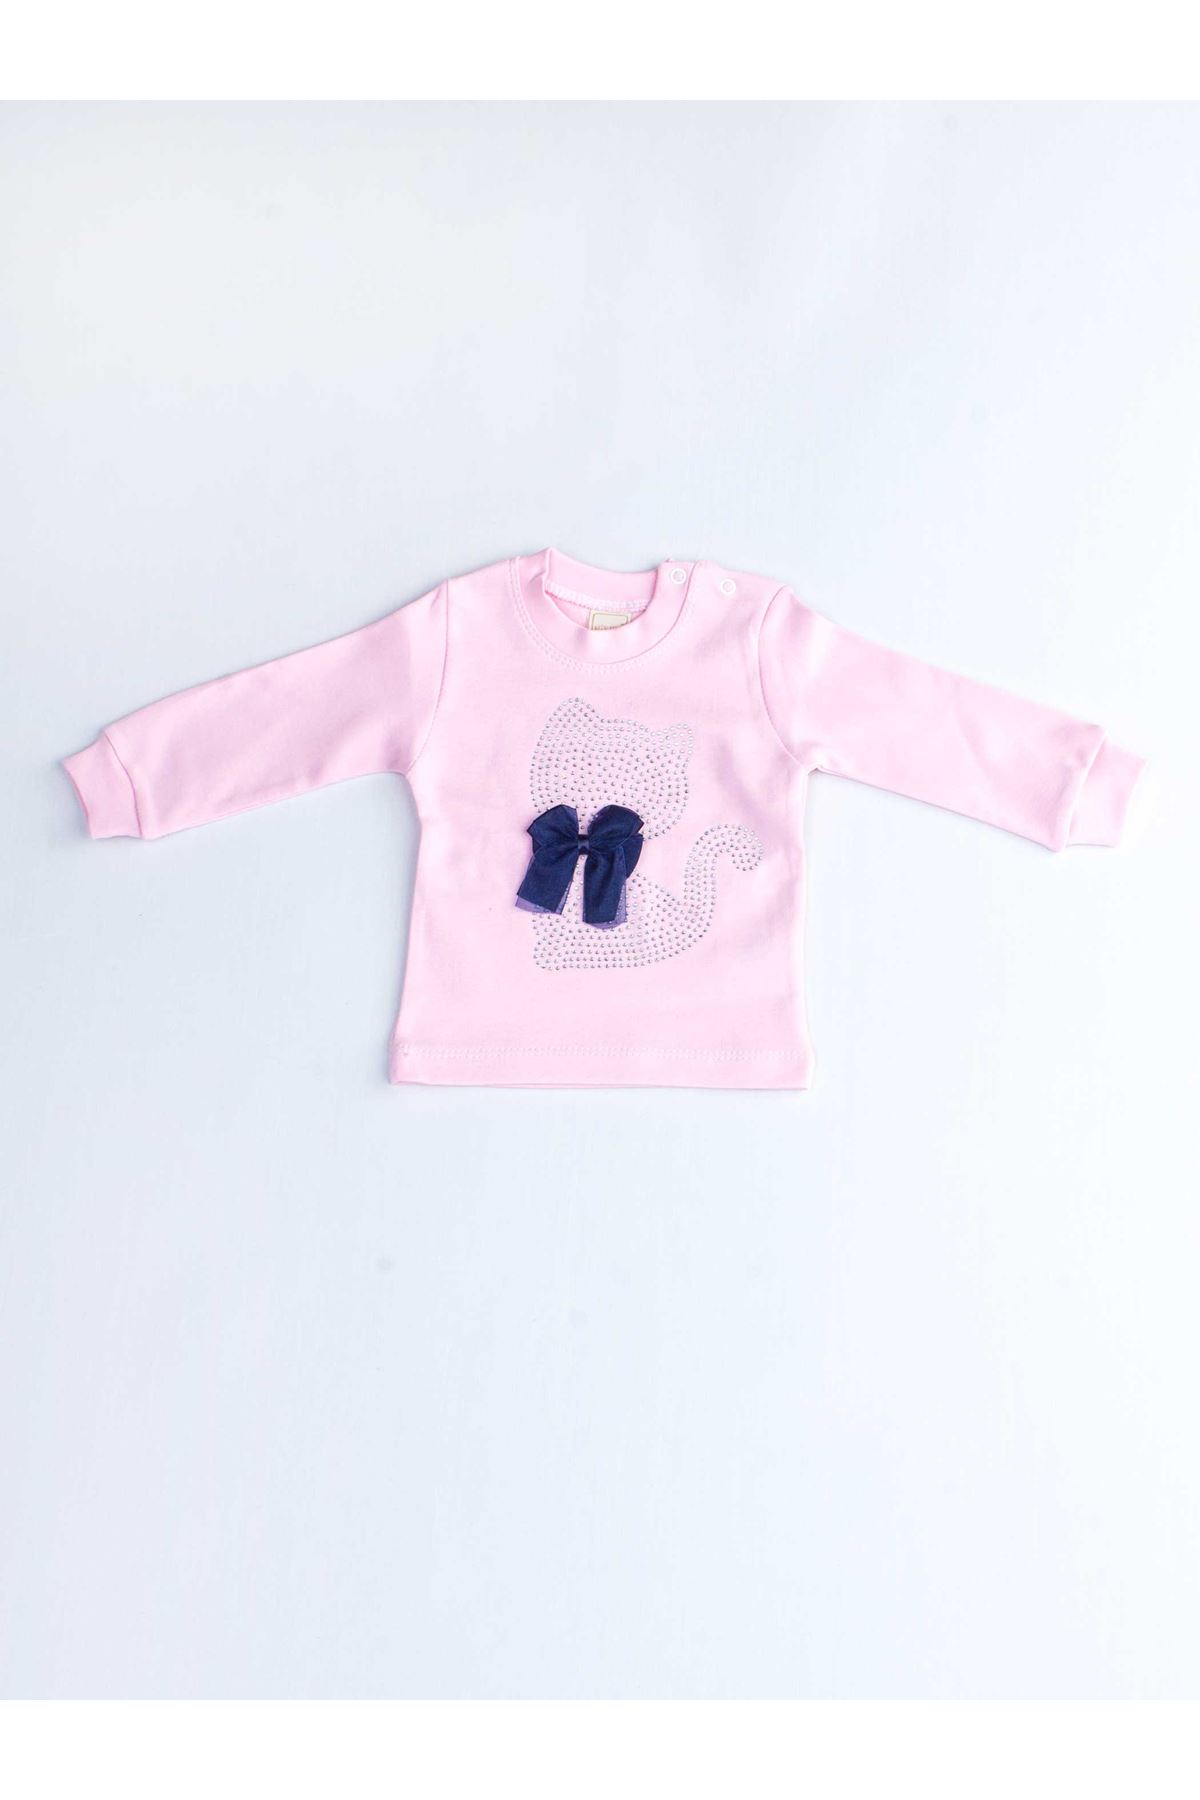 Pink Rabbit Baby Girl 2 Piece Set Tracksuit Bottom Babies Girls Wear Top Outfit Cotton Casual Casual Outfit Models